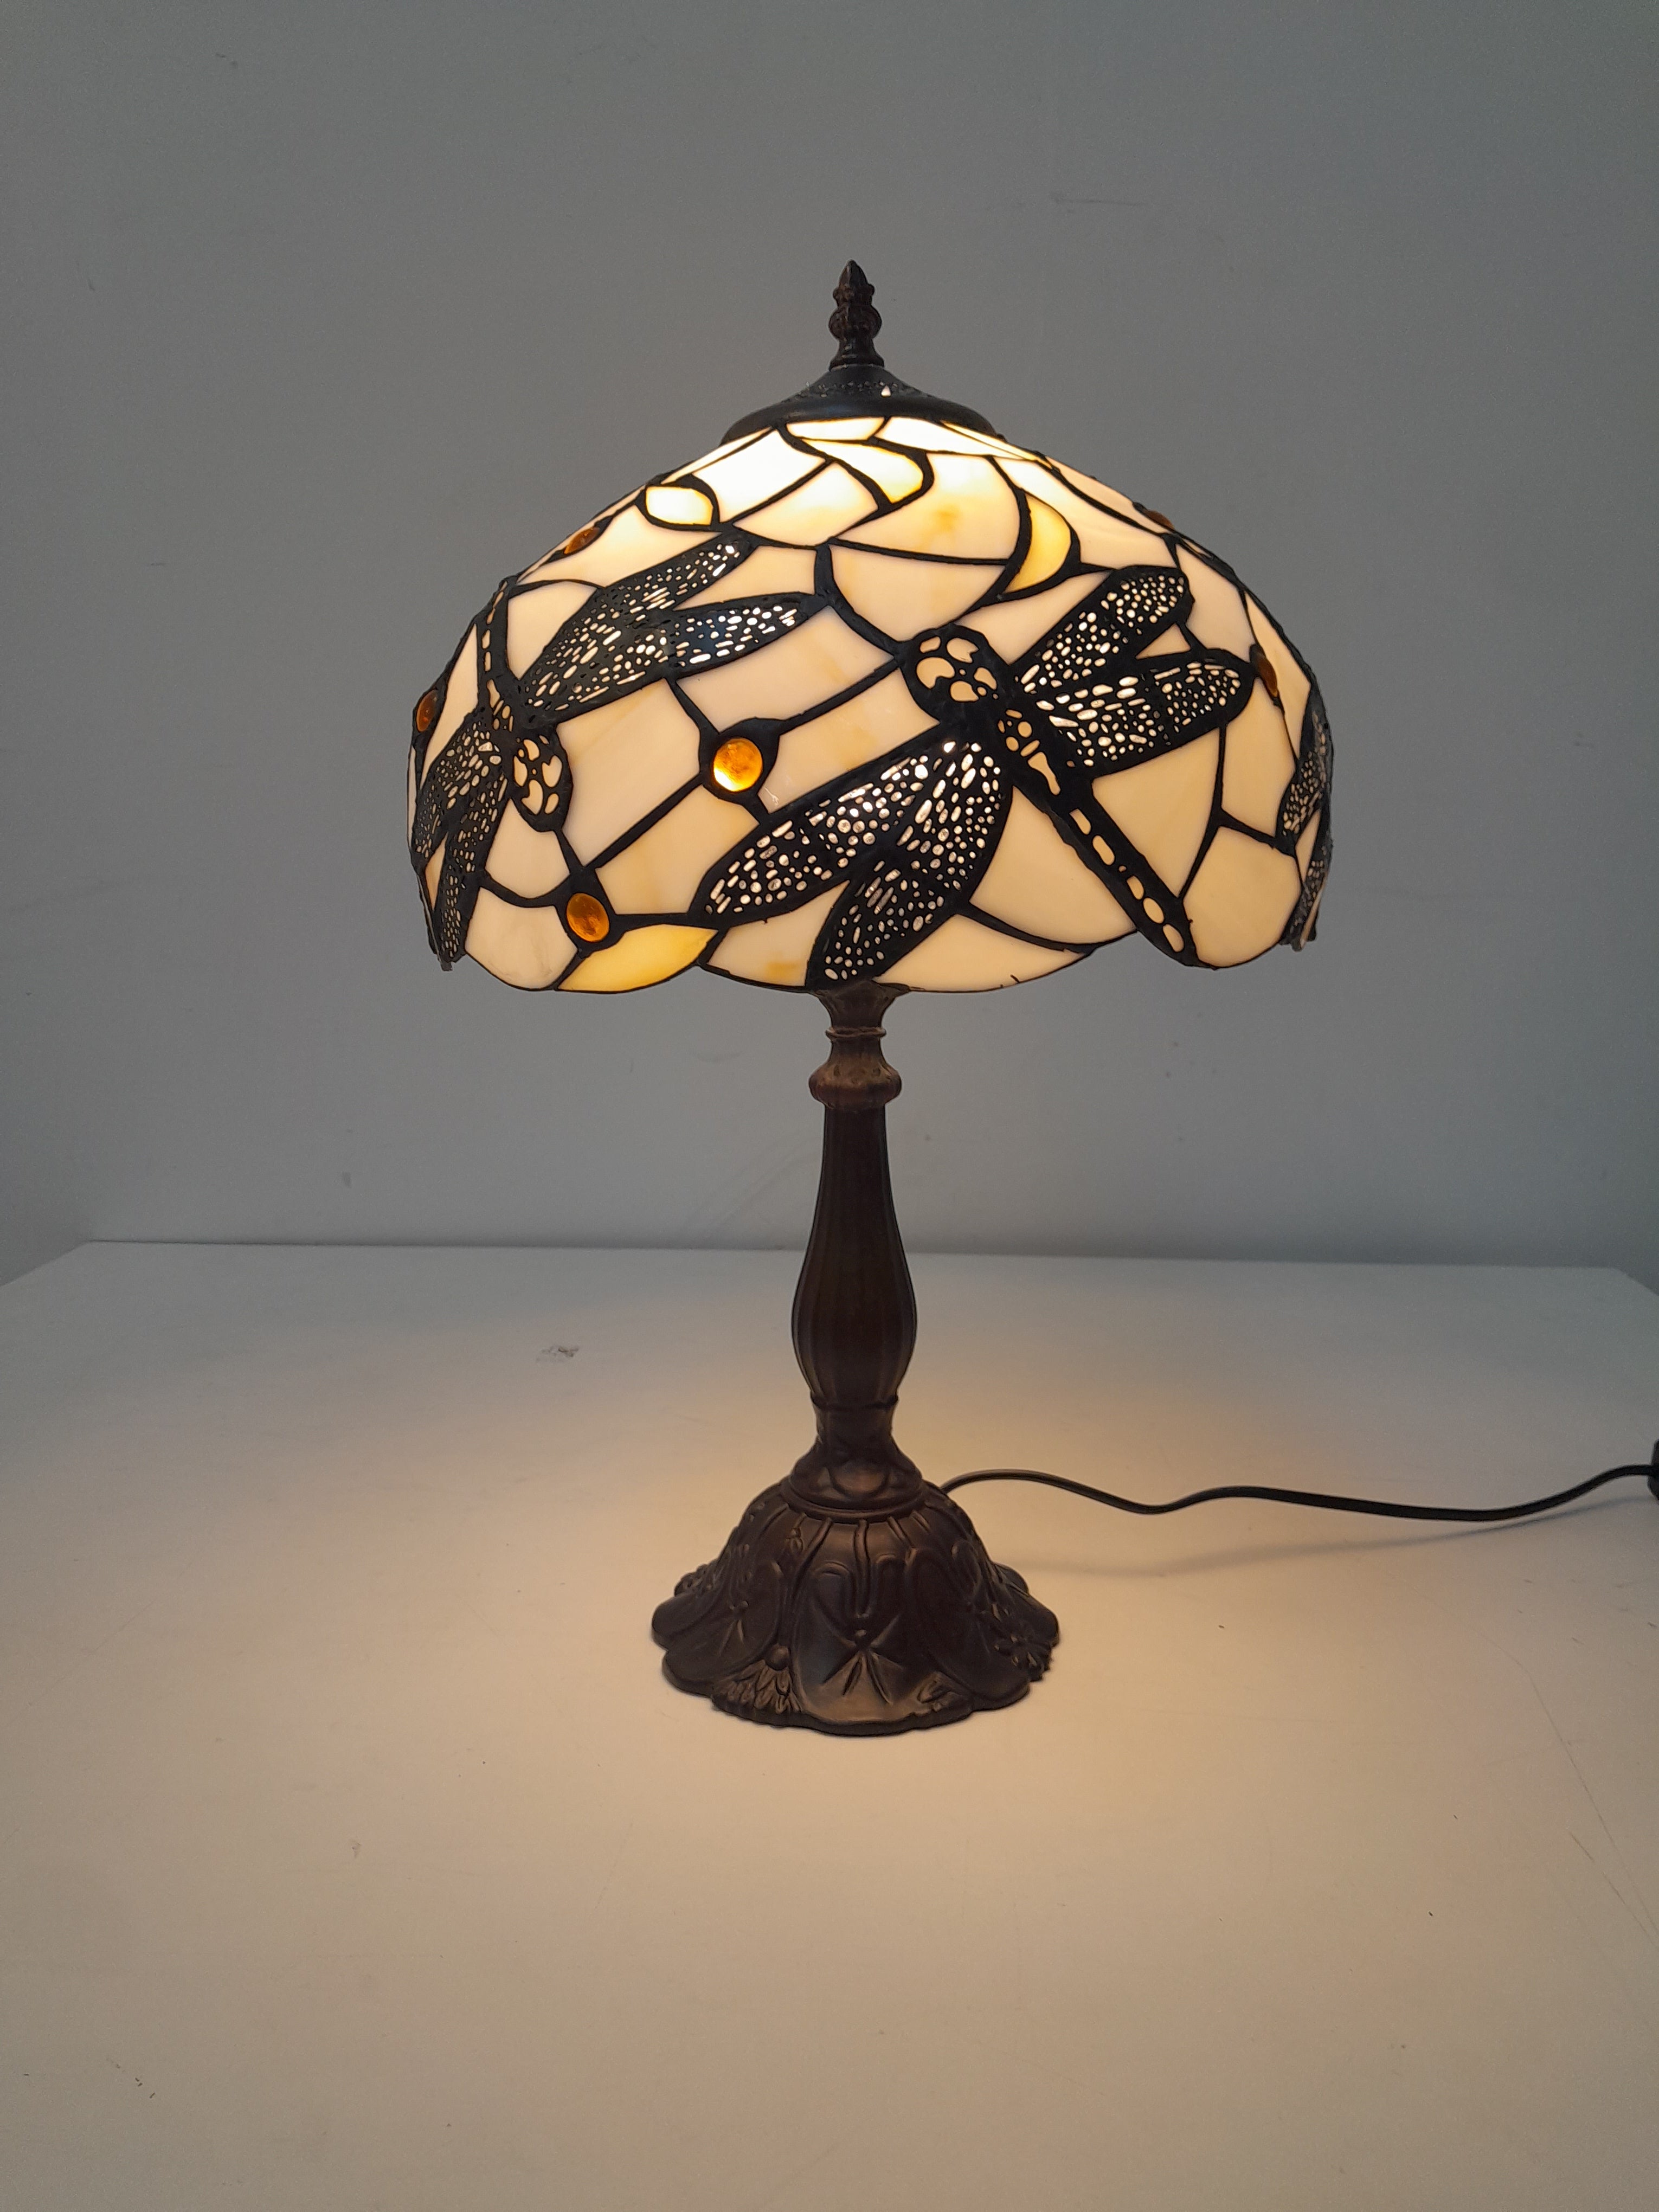 Tiffany style lamp - Dragonflies